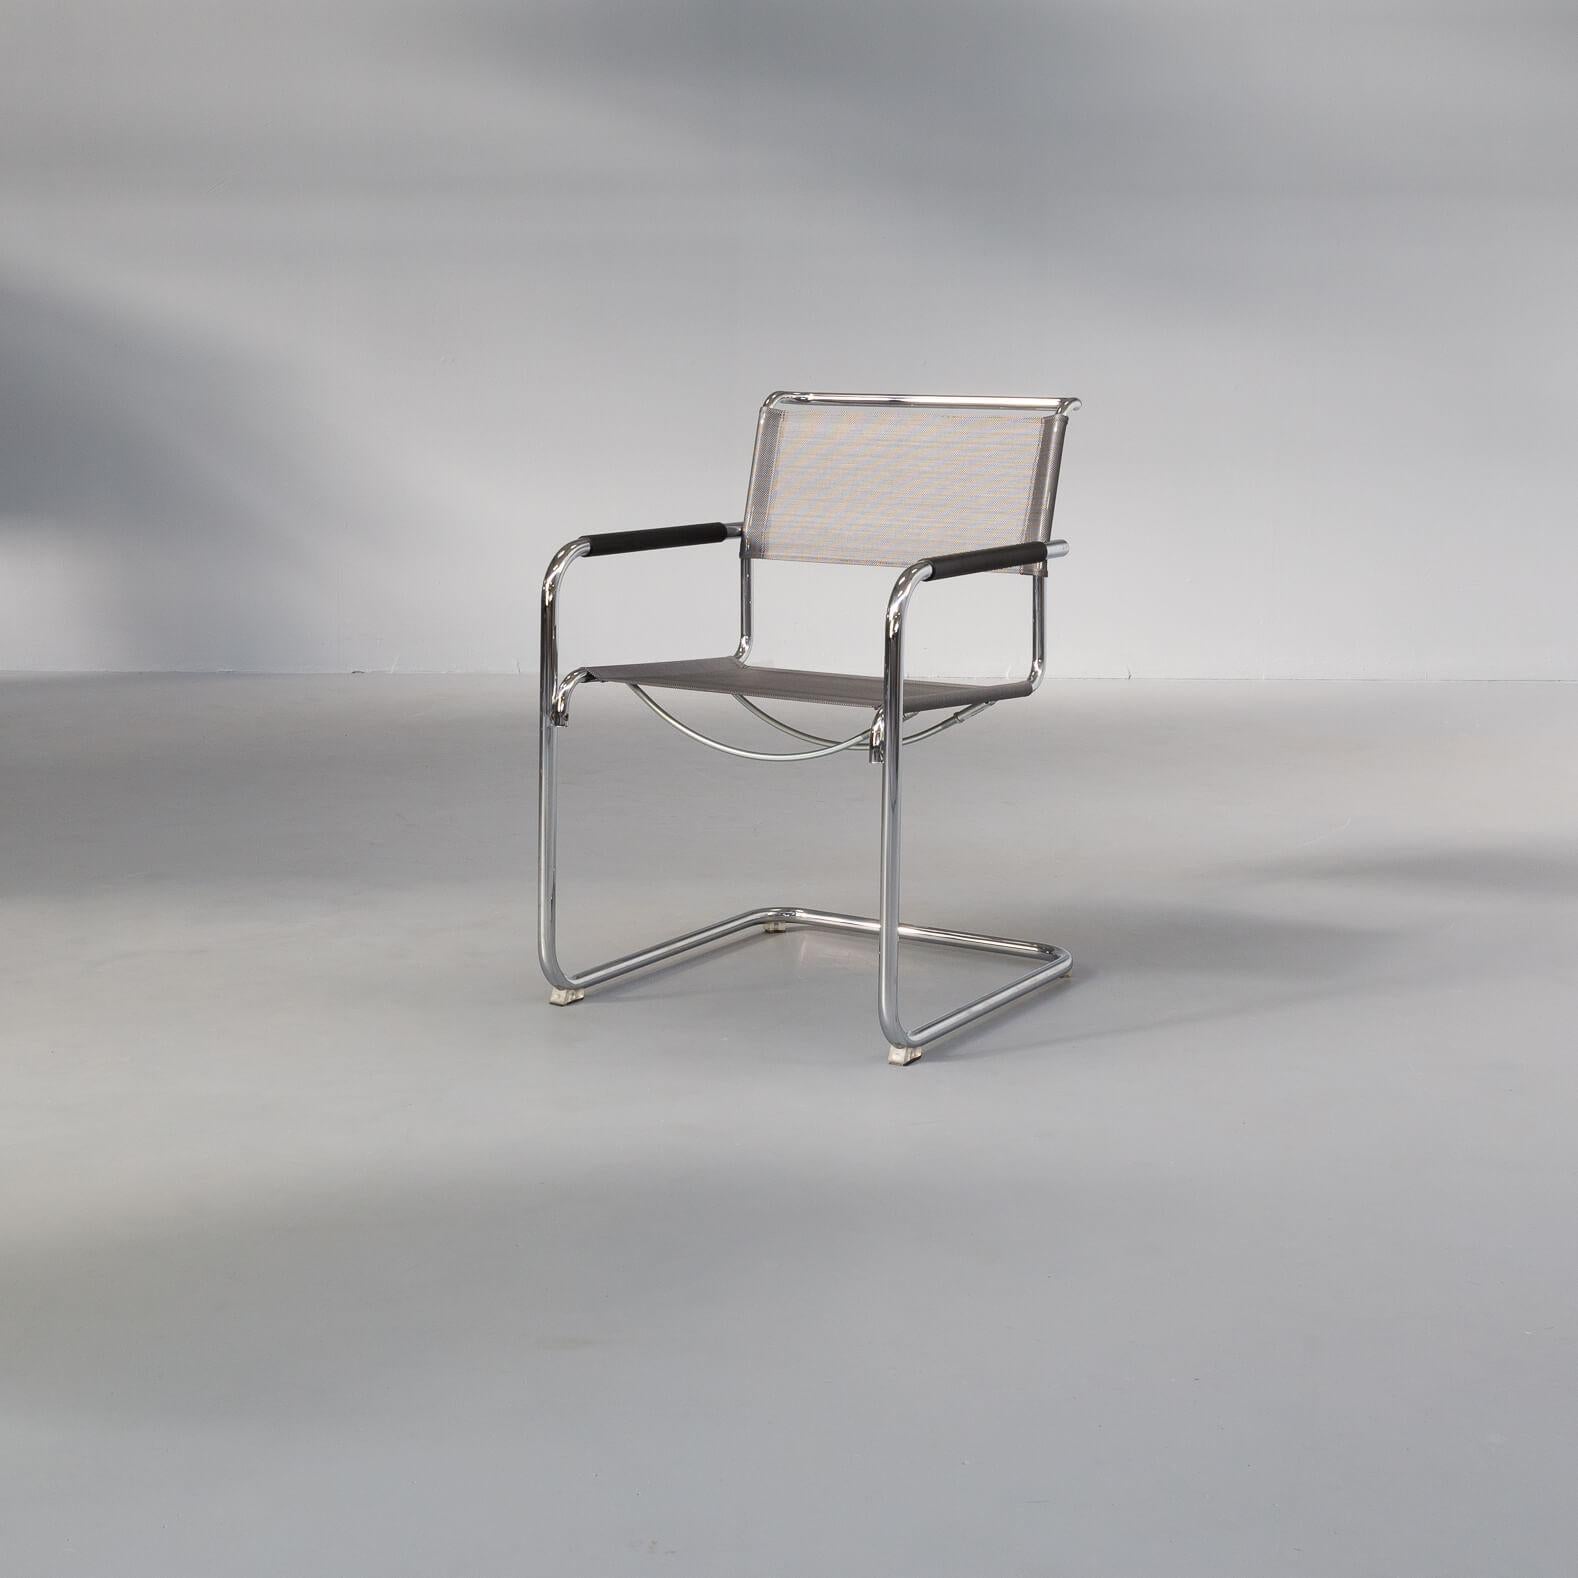 cantilever chair mart stam